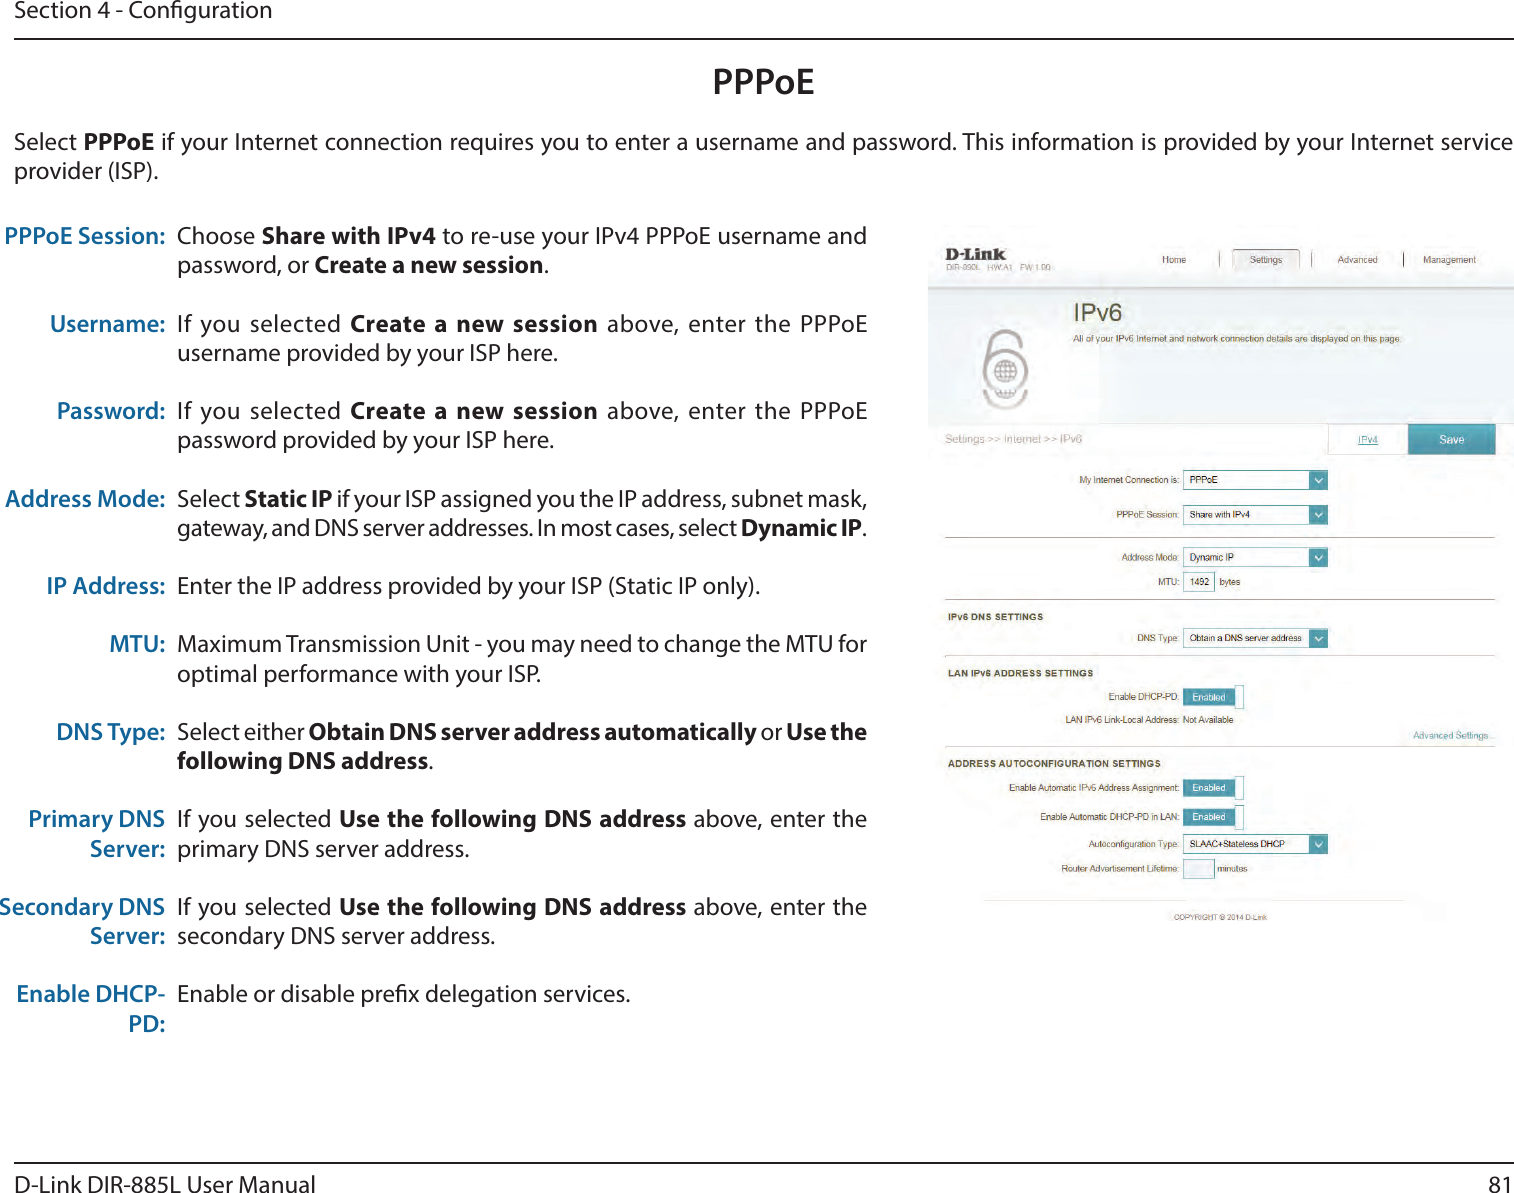 81D-Link DIR-885L User ManualSection 4 - CongurationPPPoEChoose Share with IPv4 to re-use your IPv4 PPPoE username and password, or Create a new session.If you selected Create a new session above, enter the PPPoE username provided by your ISP here.If you selected Create a new session above, enter the PPPoE password provided by your ISP here.Select Static IP if your ISP assigned you the IP address, subnet mask, gateway, and DNS server addresses. In most cases, select Dynamic IP.Enter the IP address provided by your ISP (Static IP only).Maximum Transmission Unit - you may need to change the MTU for optimal performance with your ISP.Select either Obtain DNS server address automatically or Use the following DNS address.If you selected Use the following DNS address above, enter the primary DNS server address. If you selected Use the following DNS address above, enter the secondary DNS server address.Enable or disable prex delegation services.PPPoE Session:Username:Password:Address Mode:IP Address:MTU:DNS Type:Primary DNS Server:Secondary DNS Server:Enable DHCP-PD:Select PPPoE if your Internet connection requires you to enter a username and password. This information is provided by your Internet service provider (ISP).